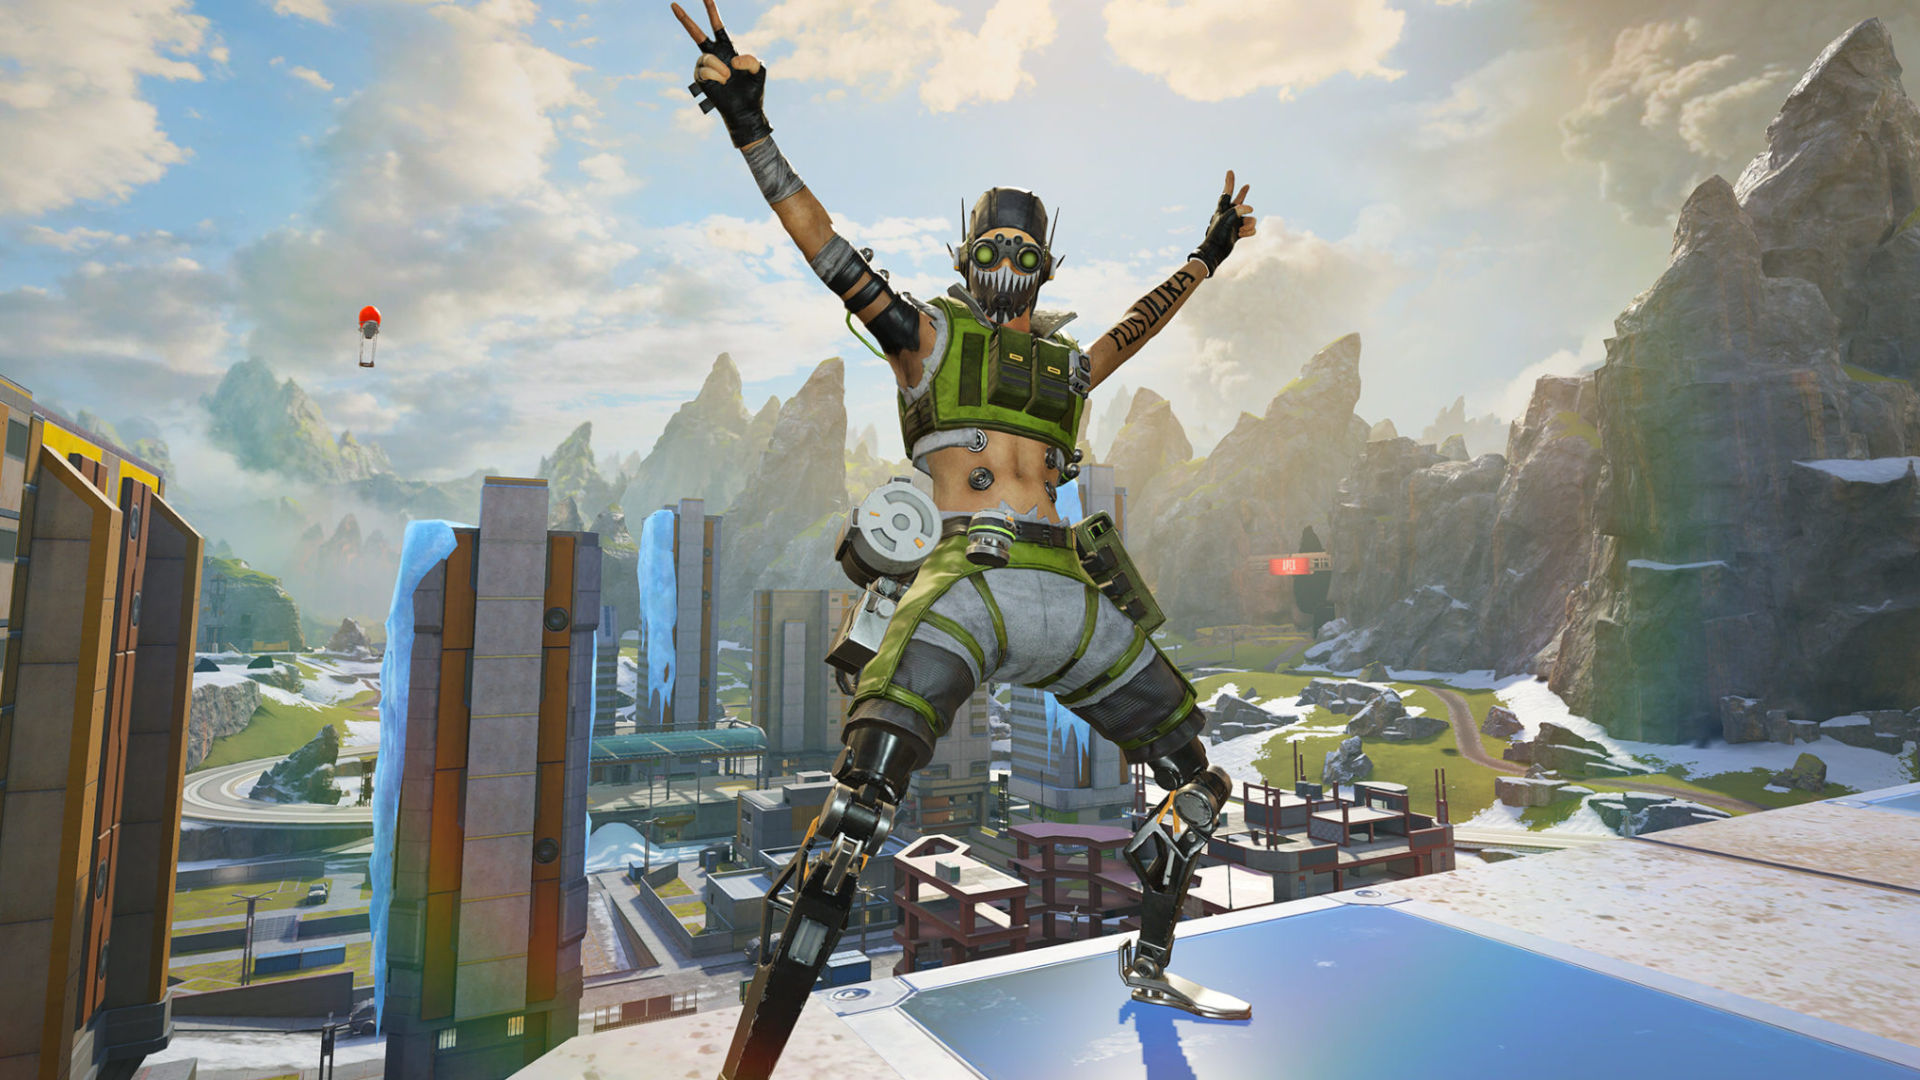 How to download Apex Legends Mobile